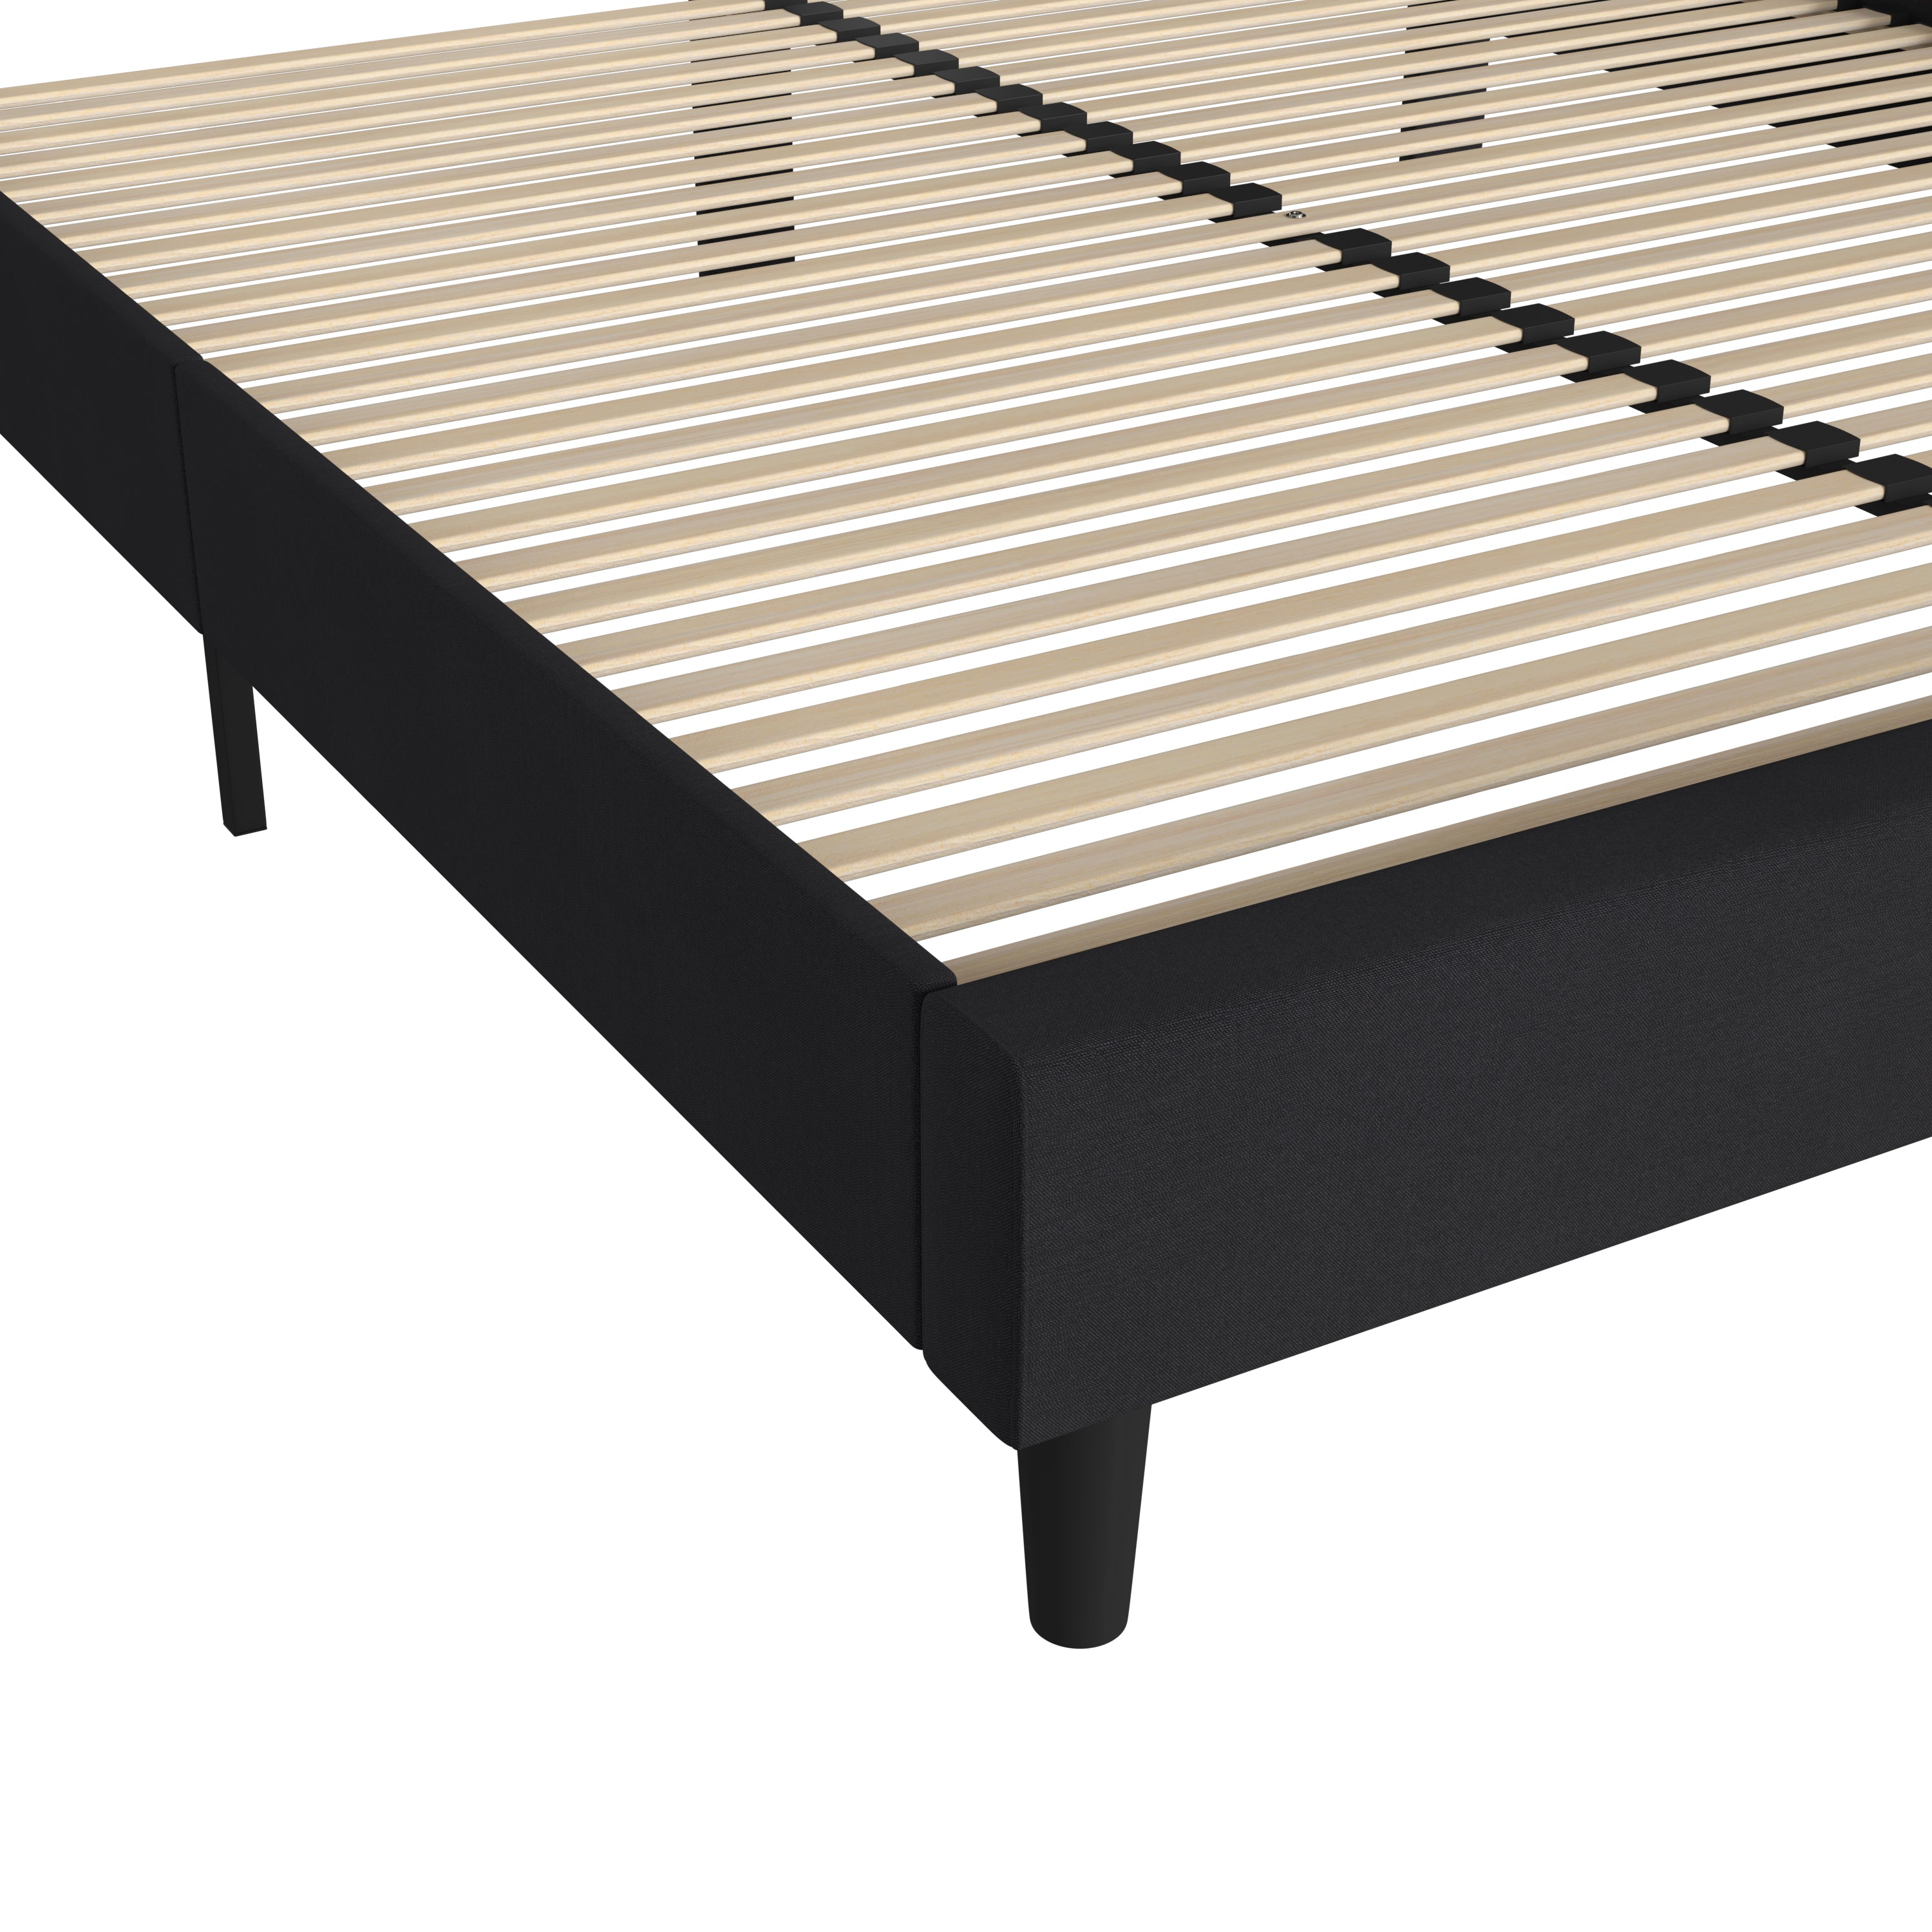 Addison Upholstered Platform Bed - Headboard with Rounded Edges - No Box Spring or Foundation Needed-Bed-Flash Furniture-Wall2Wall Furnishings